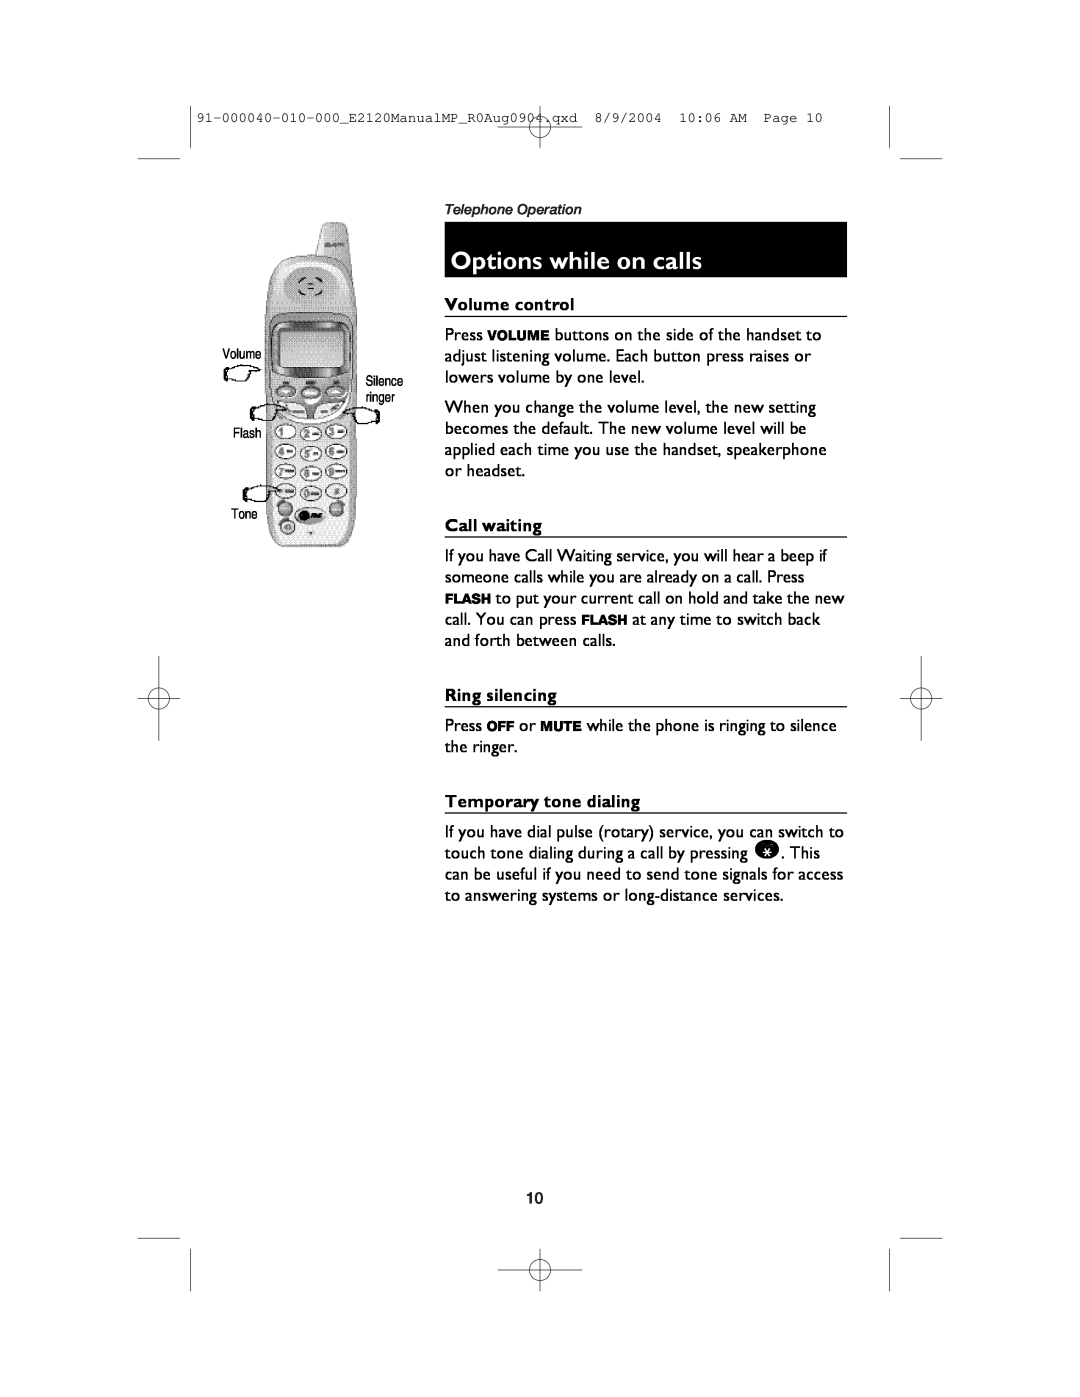 AT&T ATT-E2120 user manual Options while on calls, Volume control, Call waiting, Ring silencing, Temporary tone dialing 